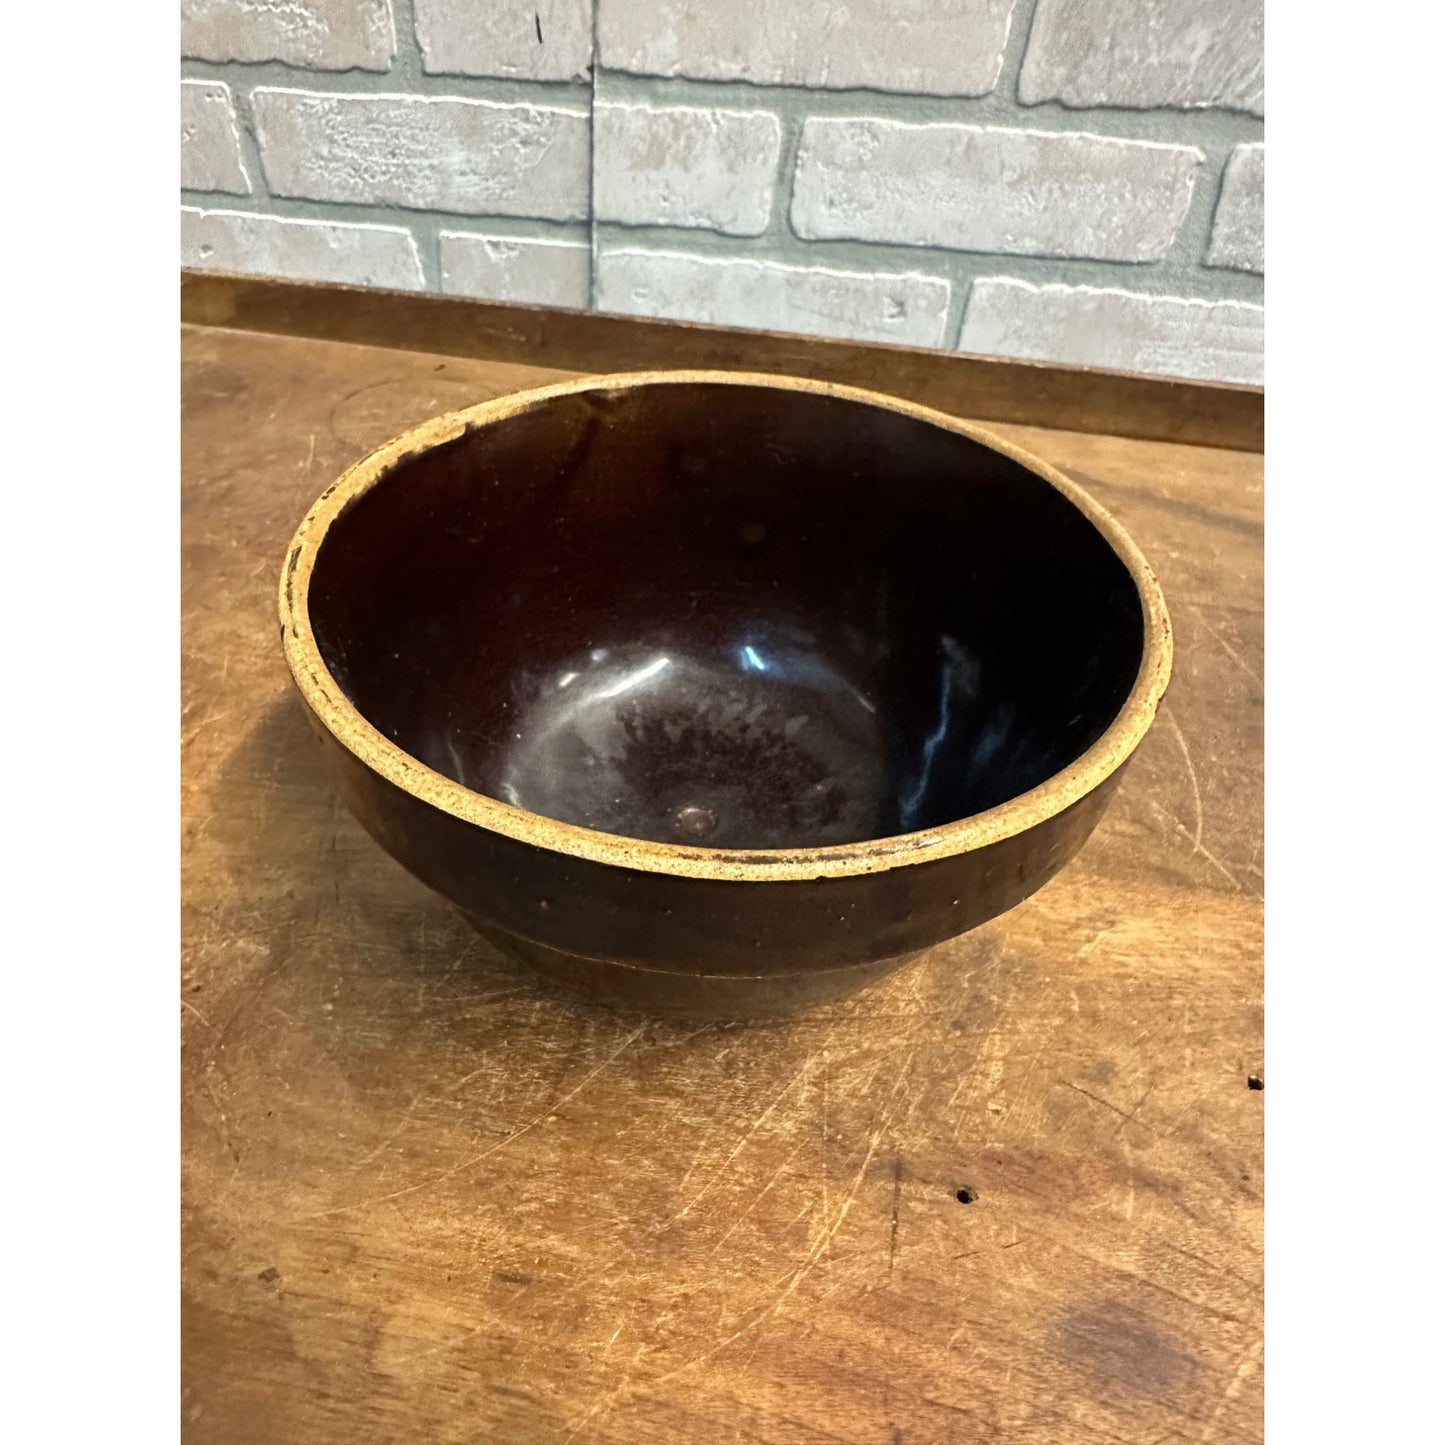 ANTIQUE NEW DREAM WHIP BROWN BOWL CROCK STONEWARE MIXING BOWL  7"